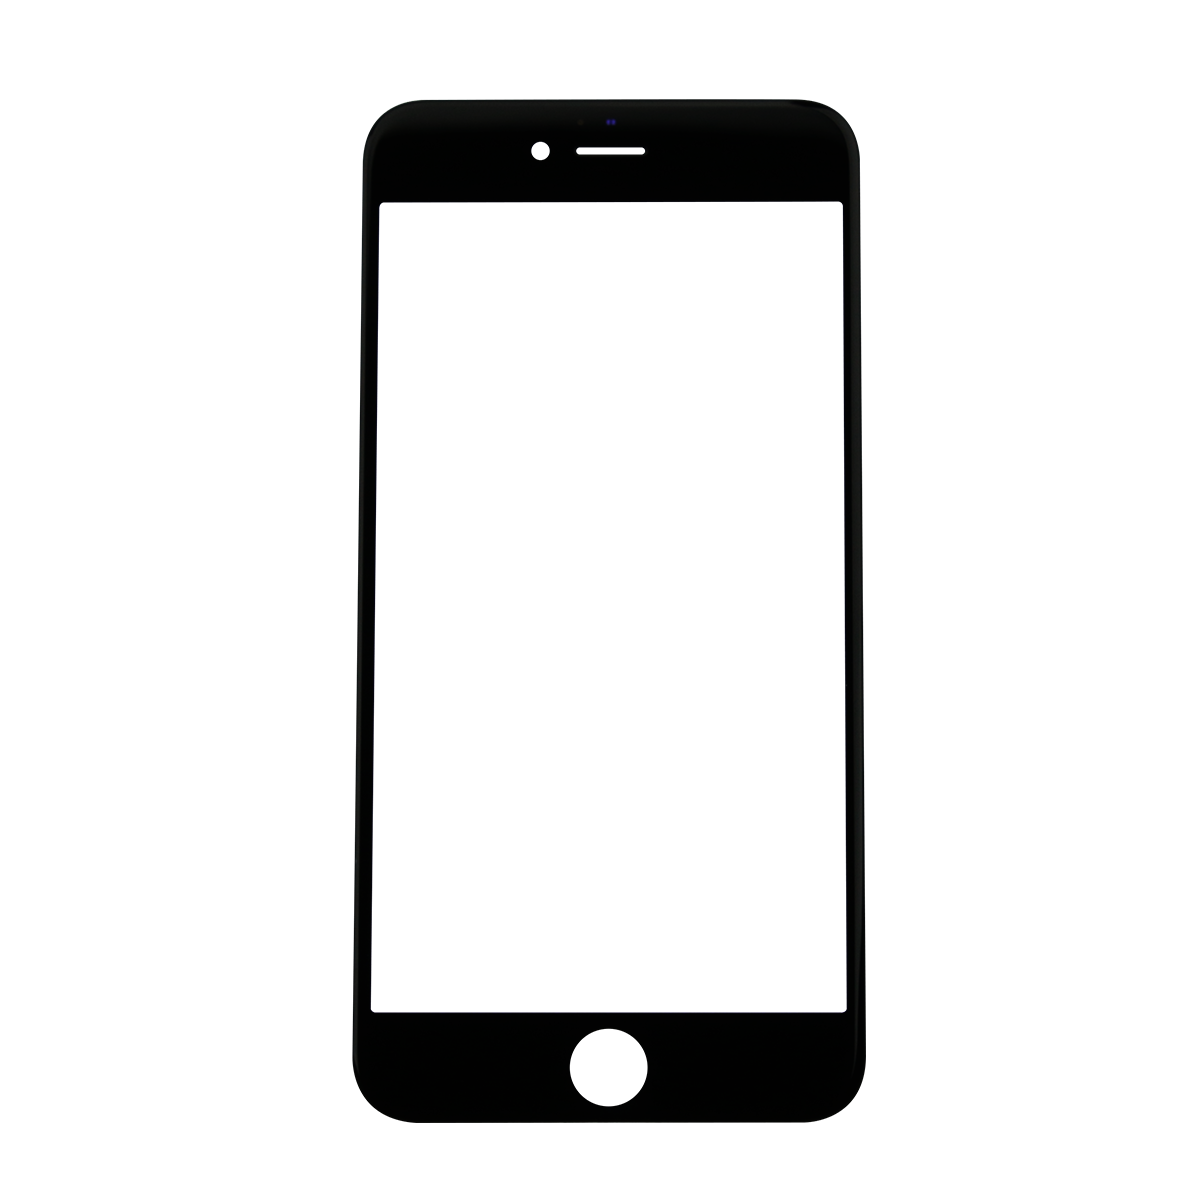 Iphone 6 White Png